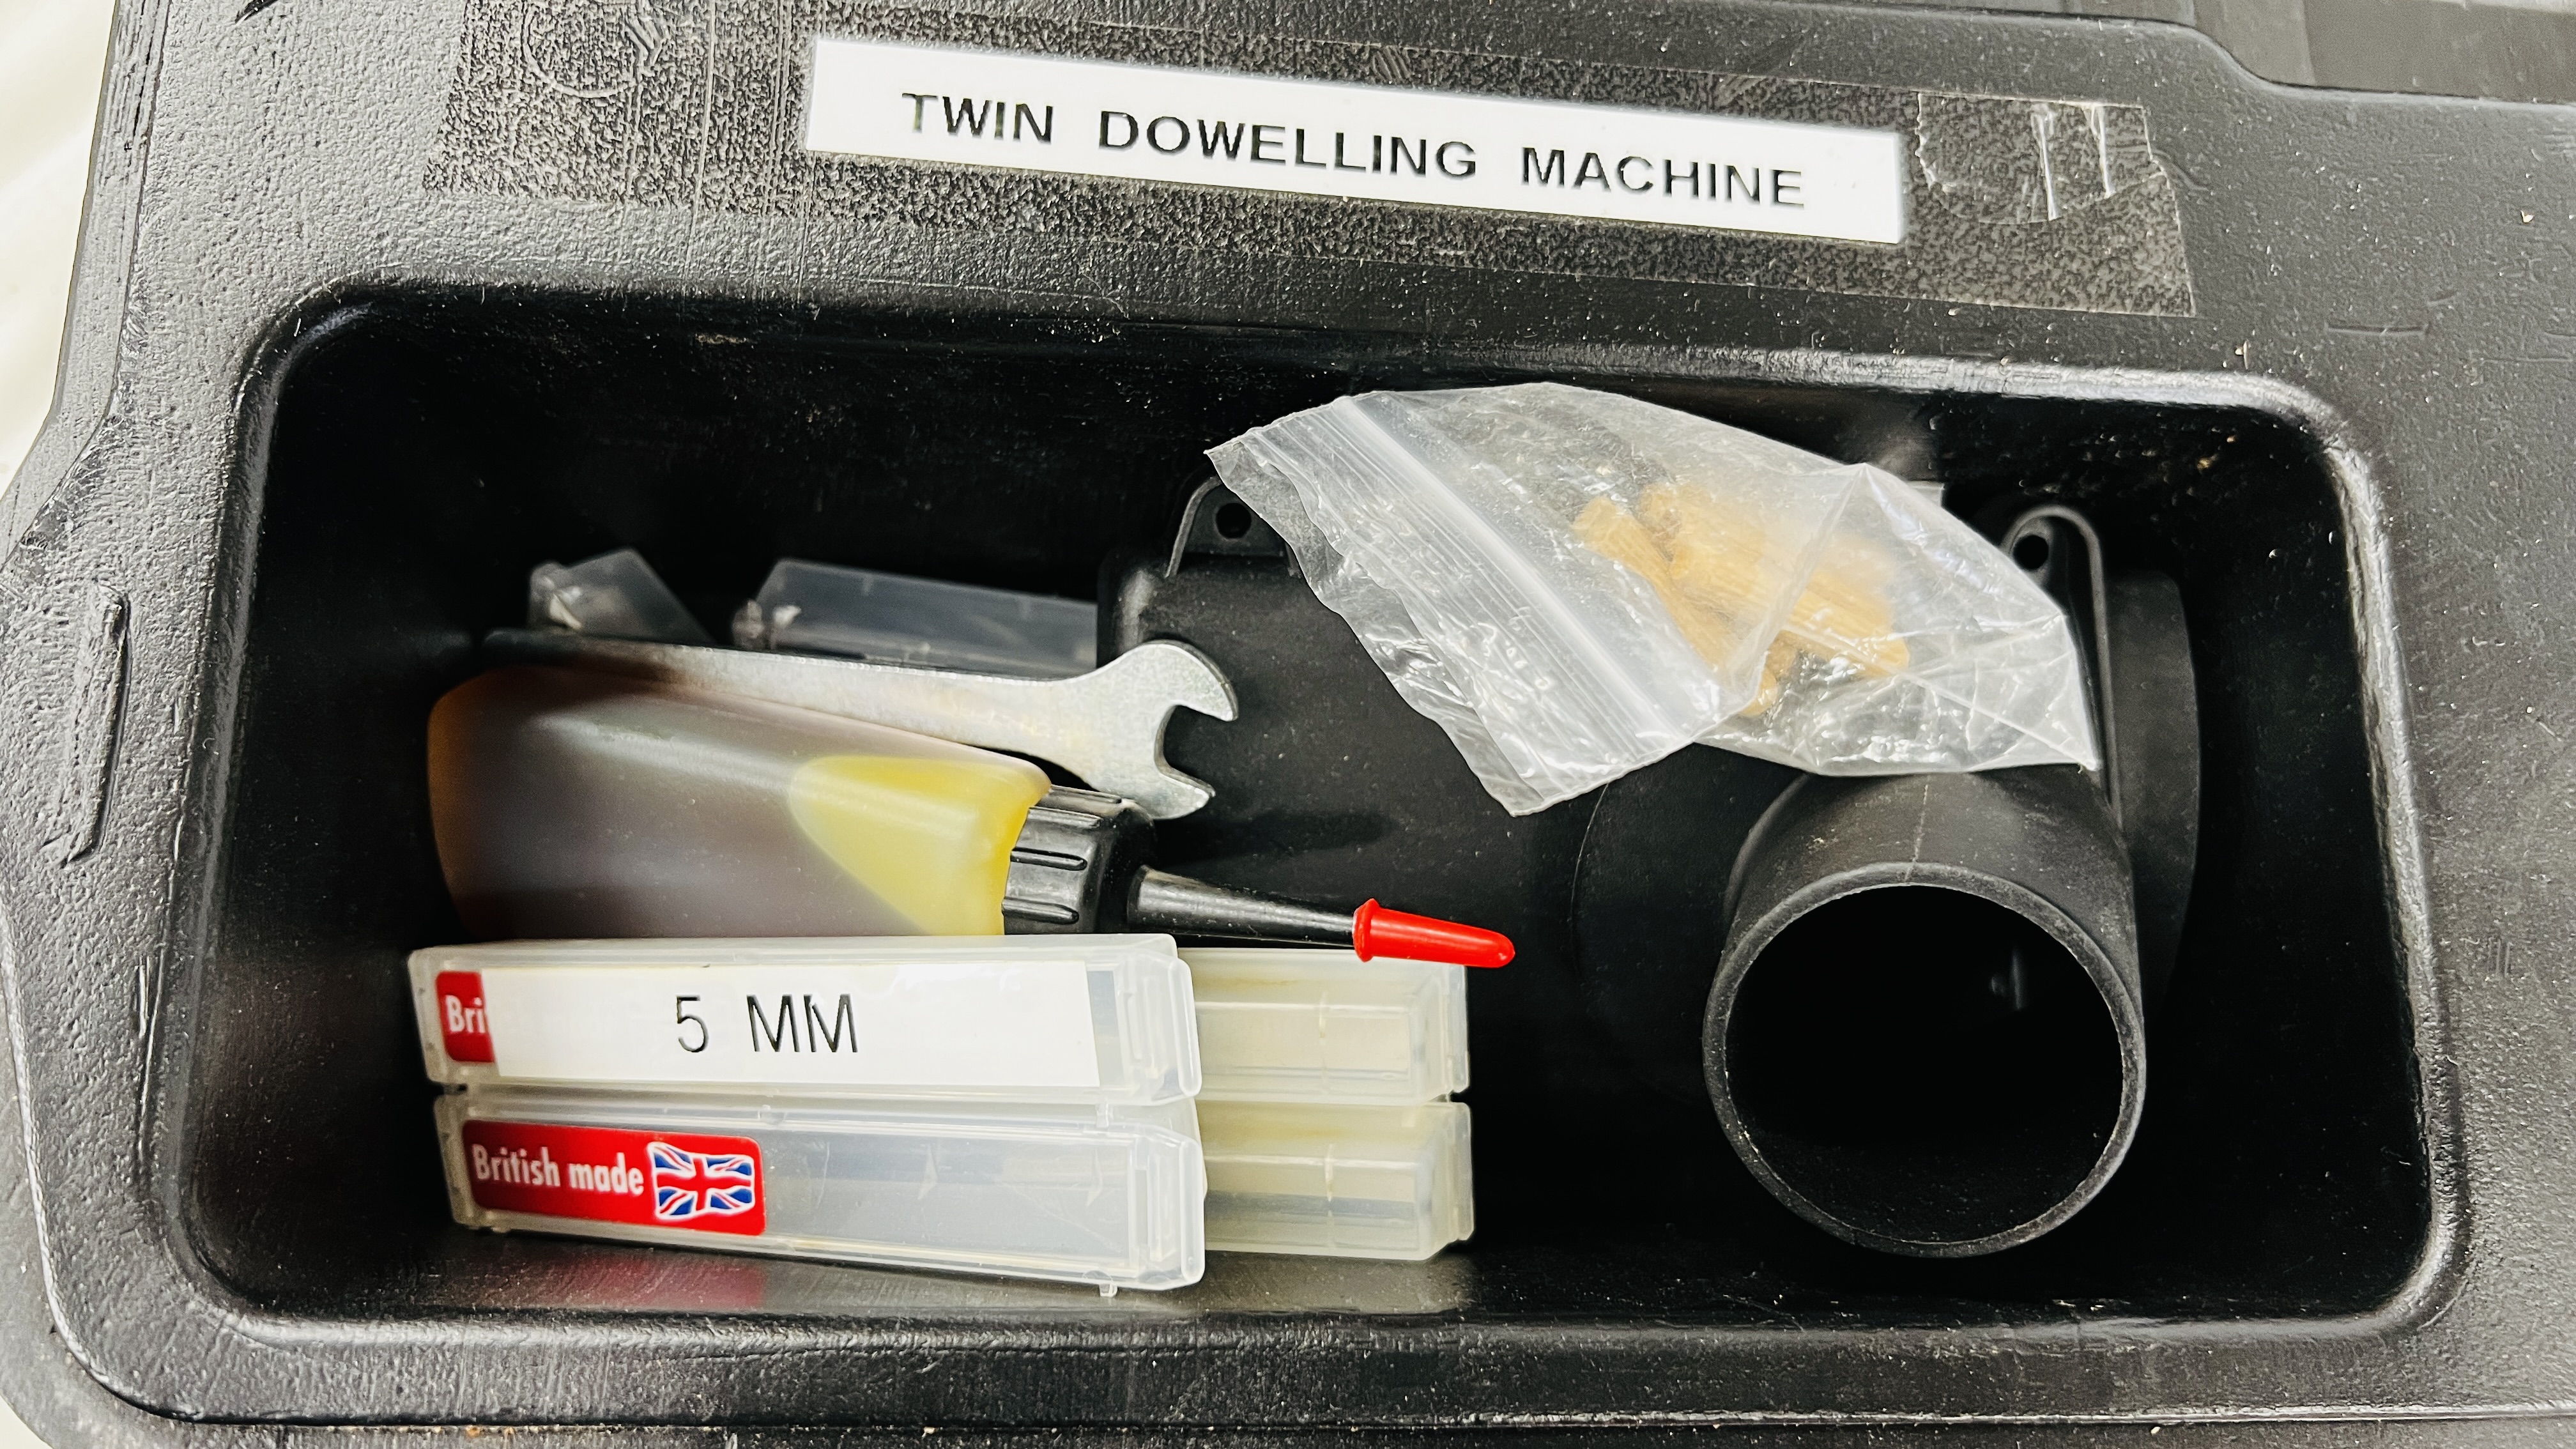 A FREUD 710W FD710 ELECTRIC DOWELING TOOL IN FITTED HARD TRANSIT CASE WITH ACCESSORIES - SOLD AS - Image 6 of 6